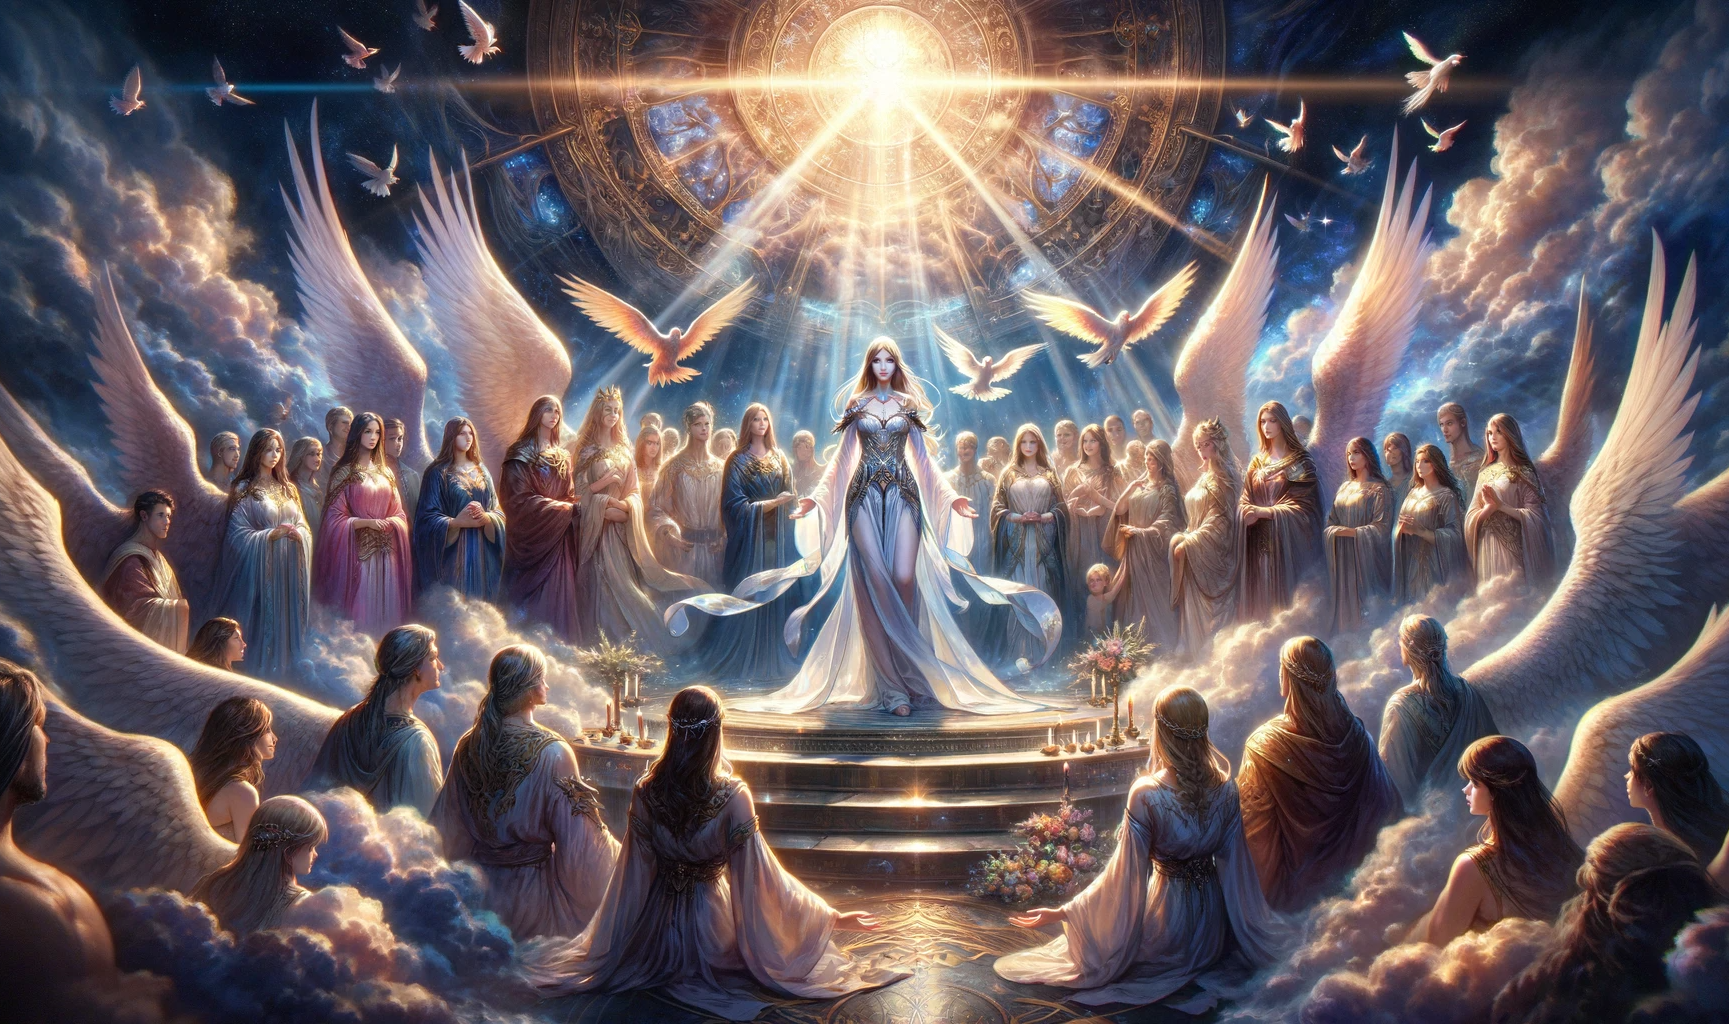 DALL·E 2023-11-25 12.55.01 - A momentous and emotional scene from Chapter 22, set in a celestial court. The setting is grand and ethereal, with a backdrop of majestic clouds and r